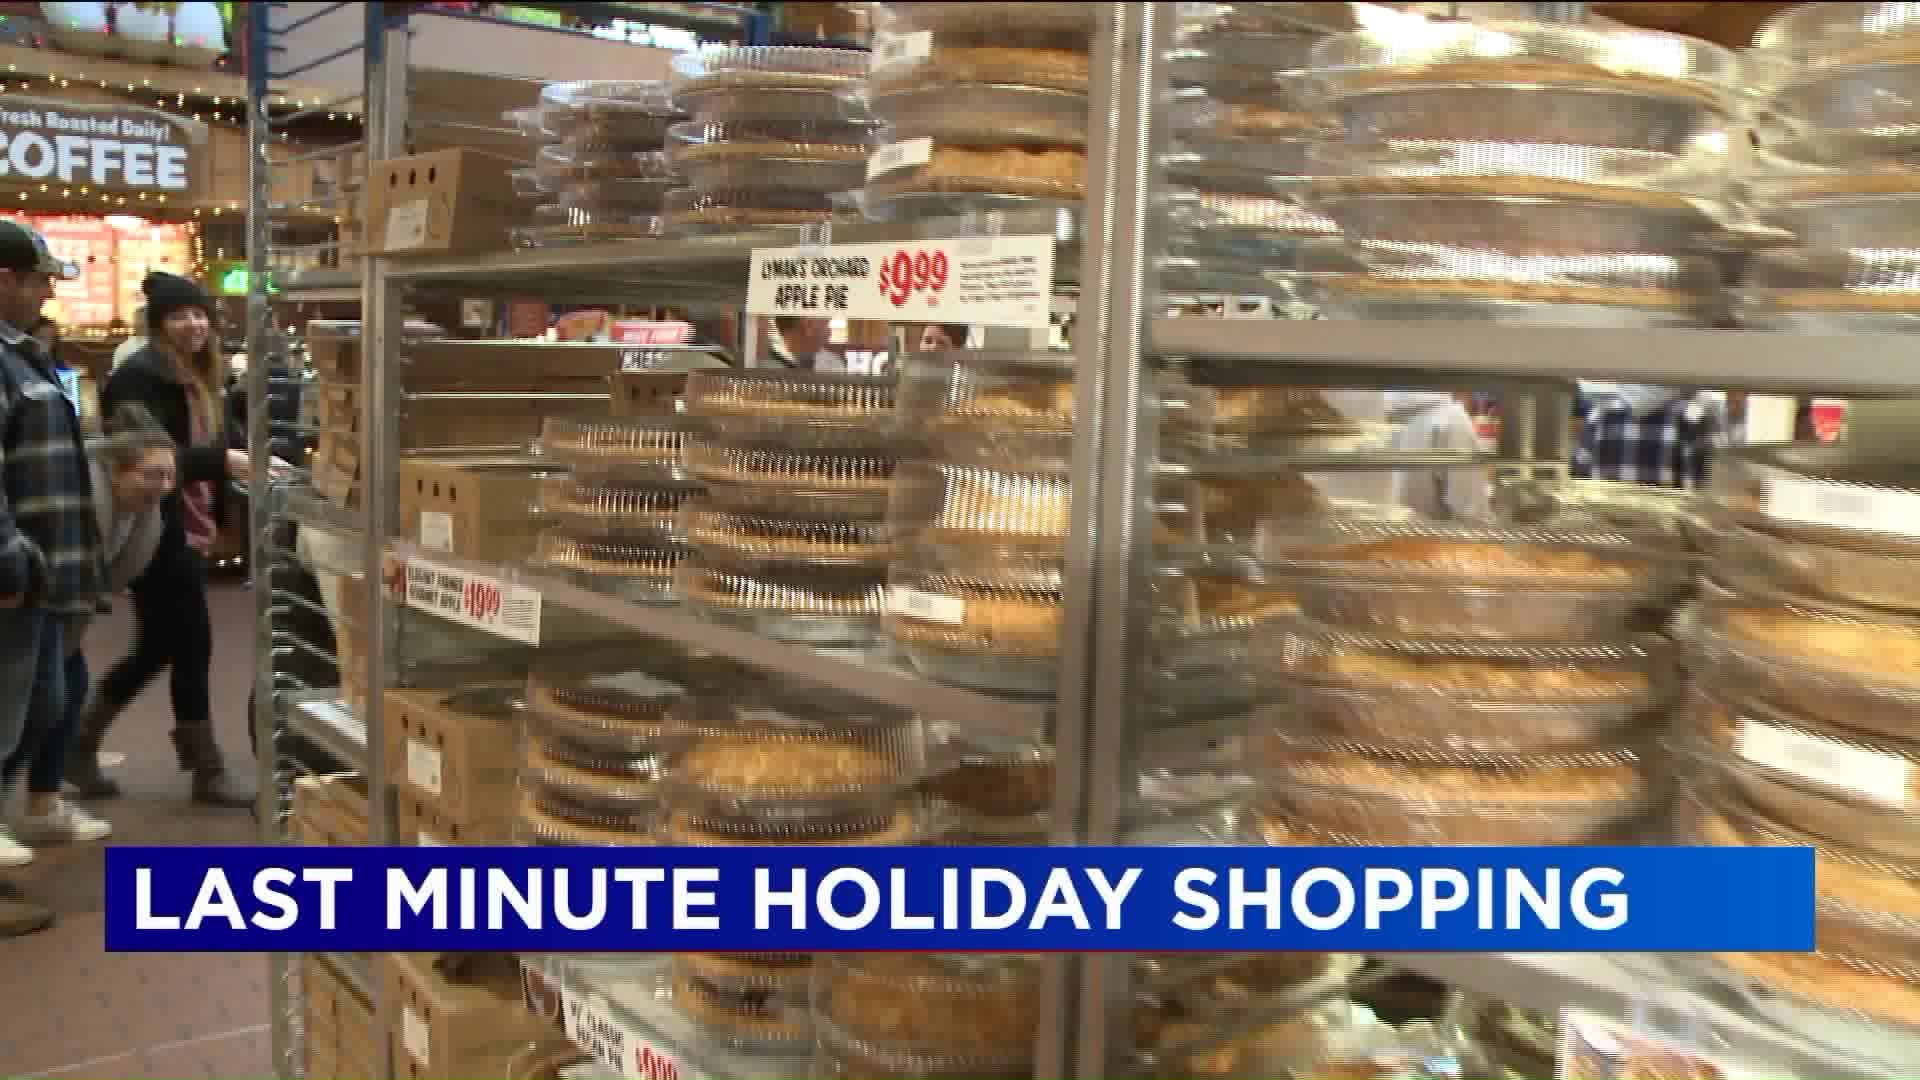 One day left! Holiday shopping keeps getting busier